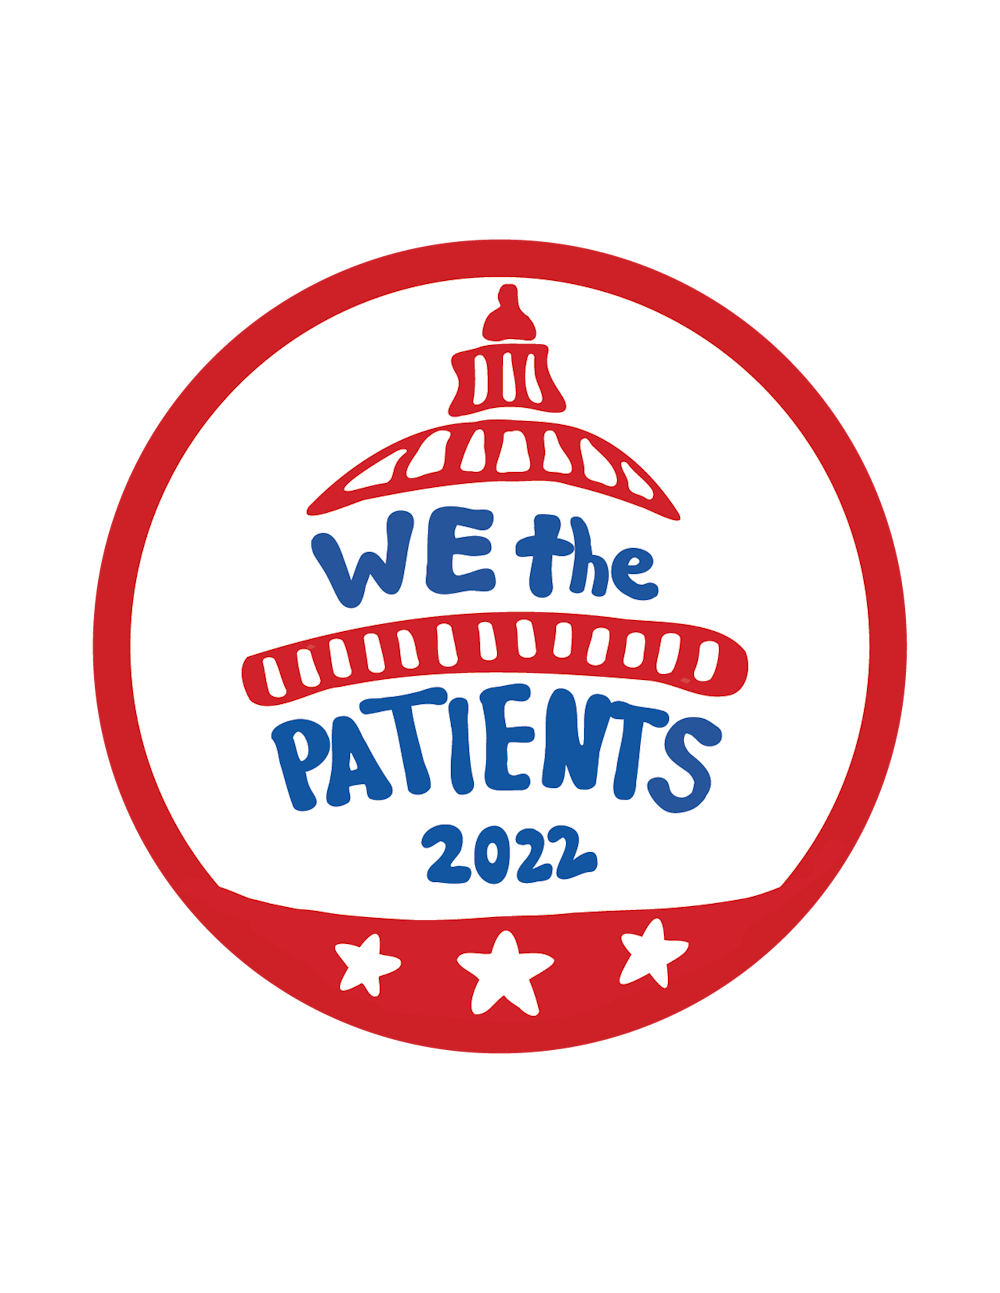 Patients on Capitol Hill